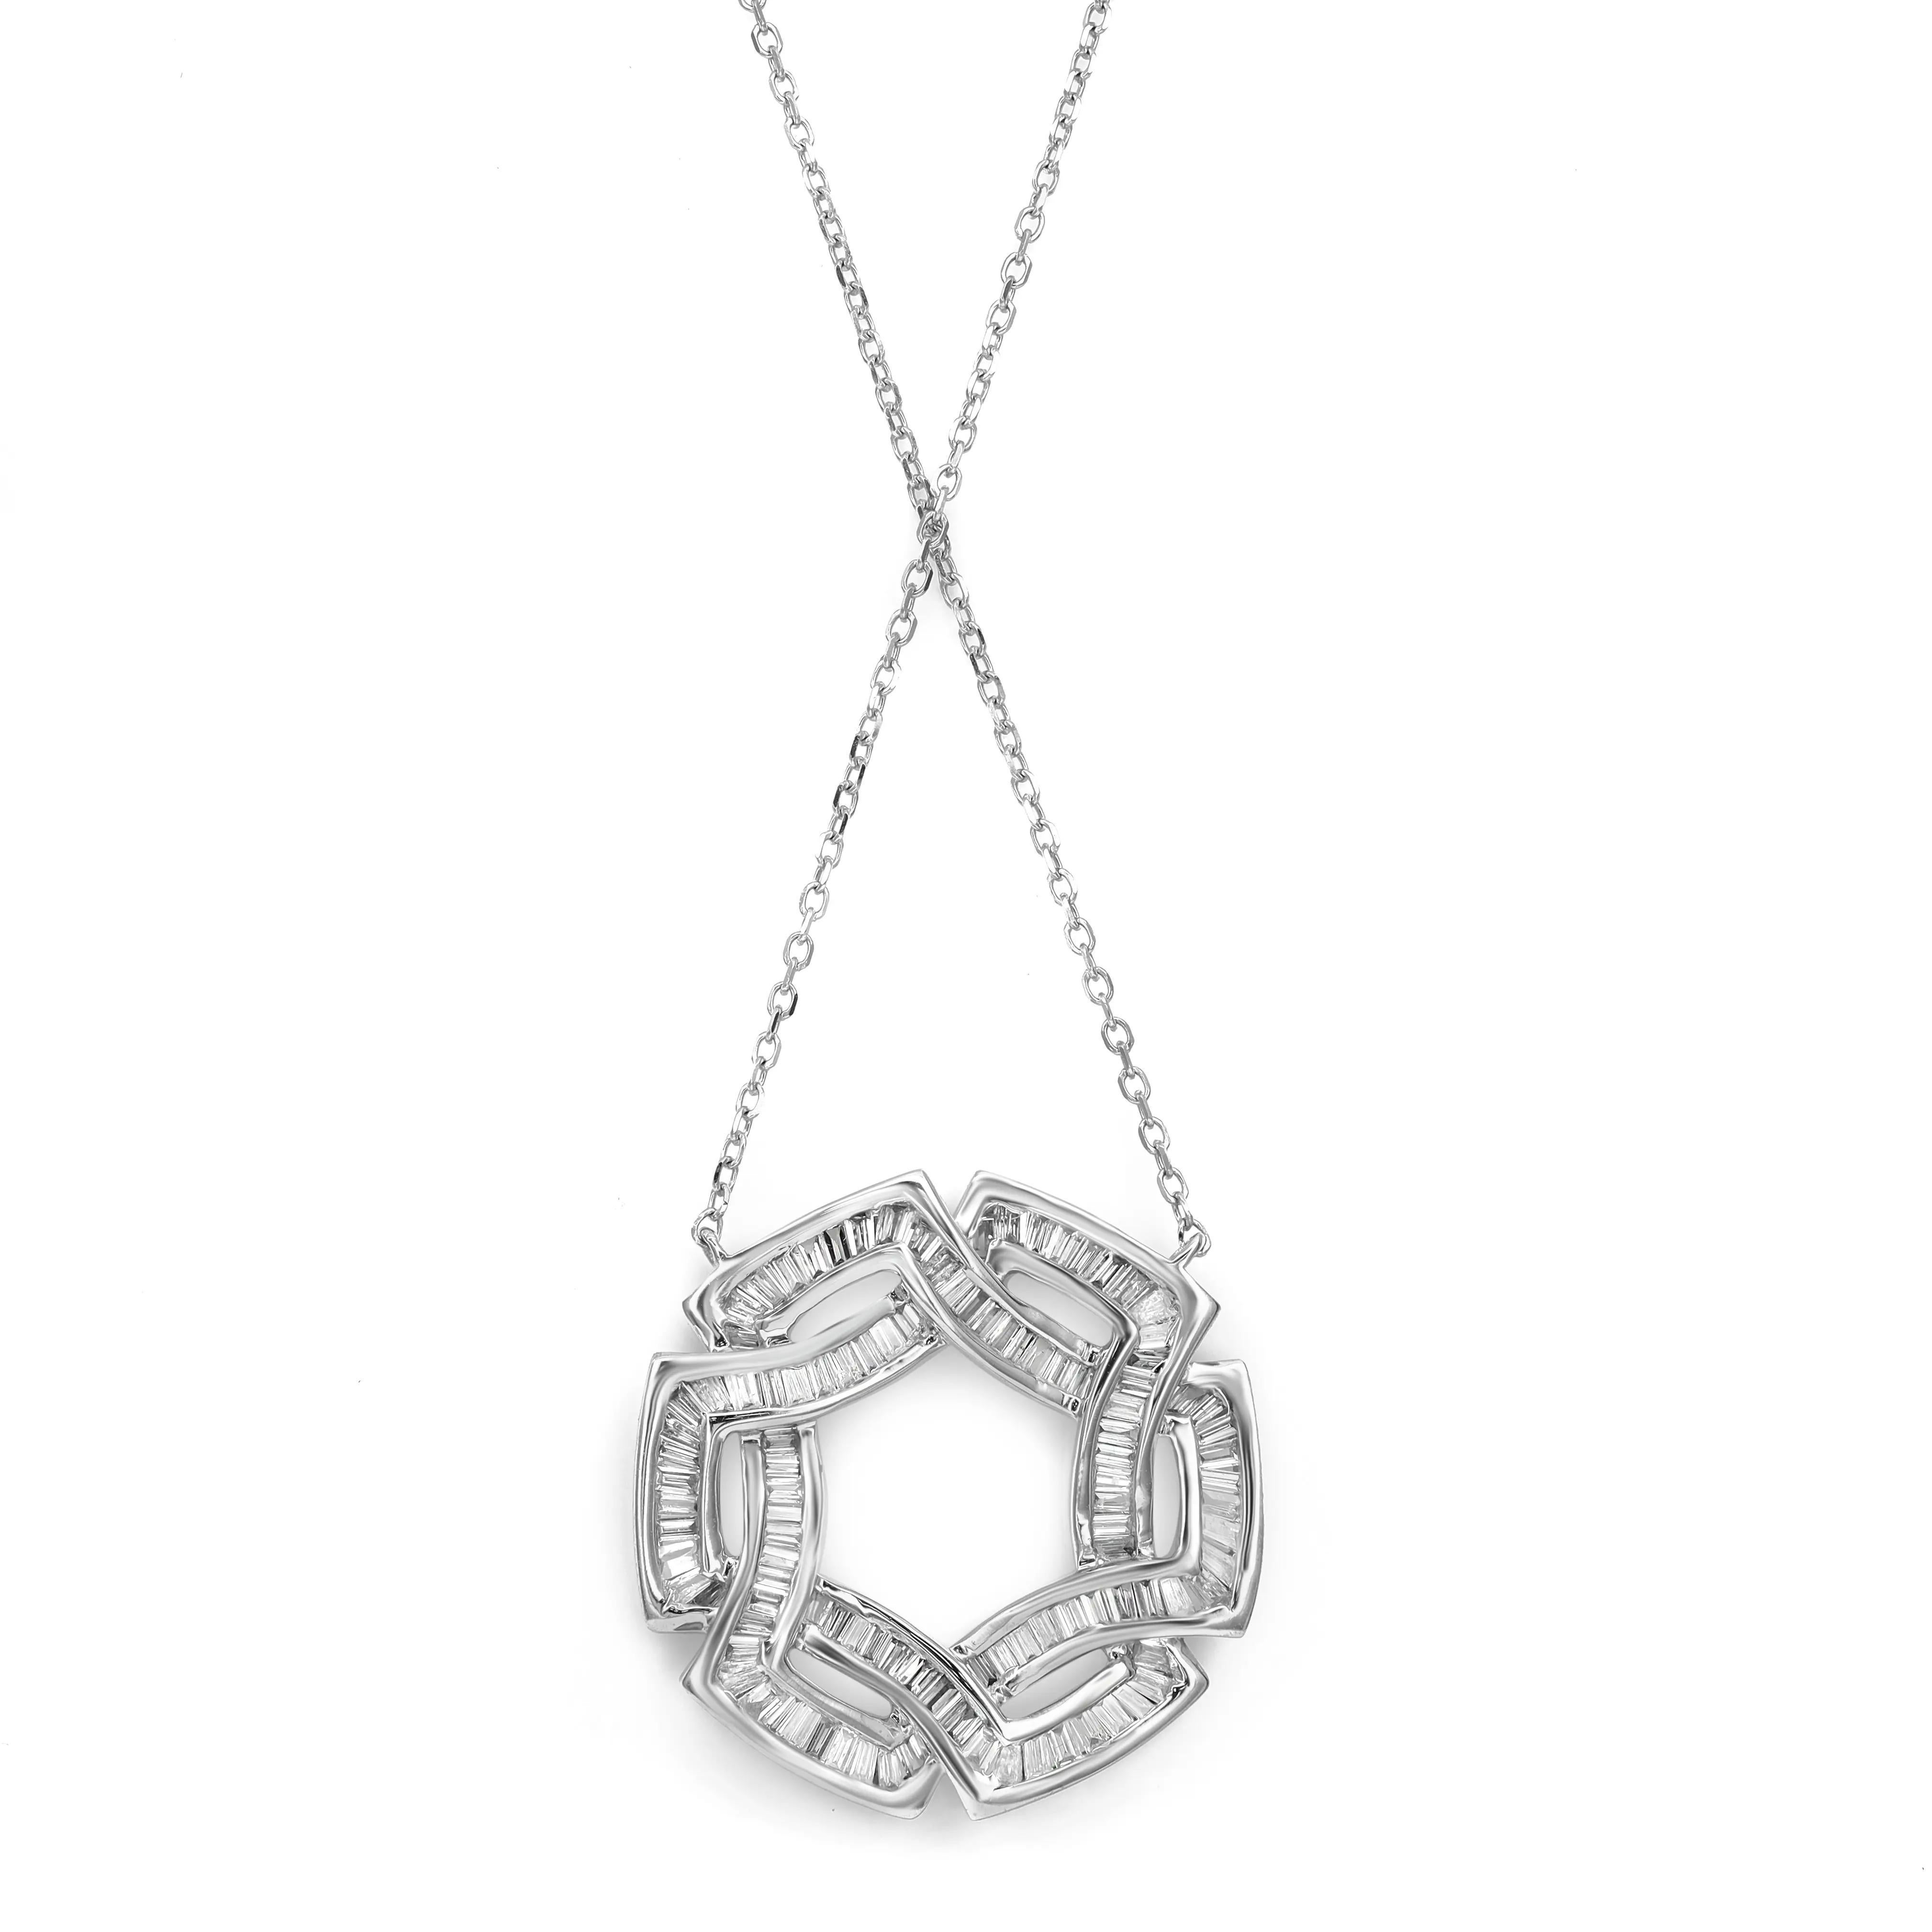 Elevate any outfit with this beautiful secret circle pendant necklace. Crafted in 14K white gold. This pendant features two intertwined circles, symbolizing unity and everlasting love. Adorned with channel set sparkling baguette cut diamonds